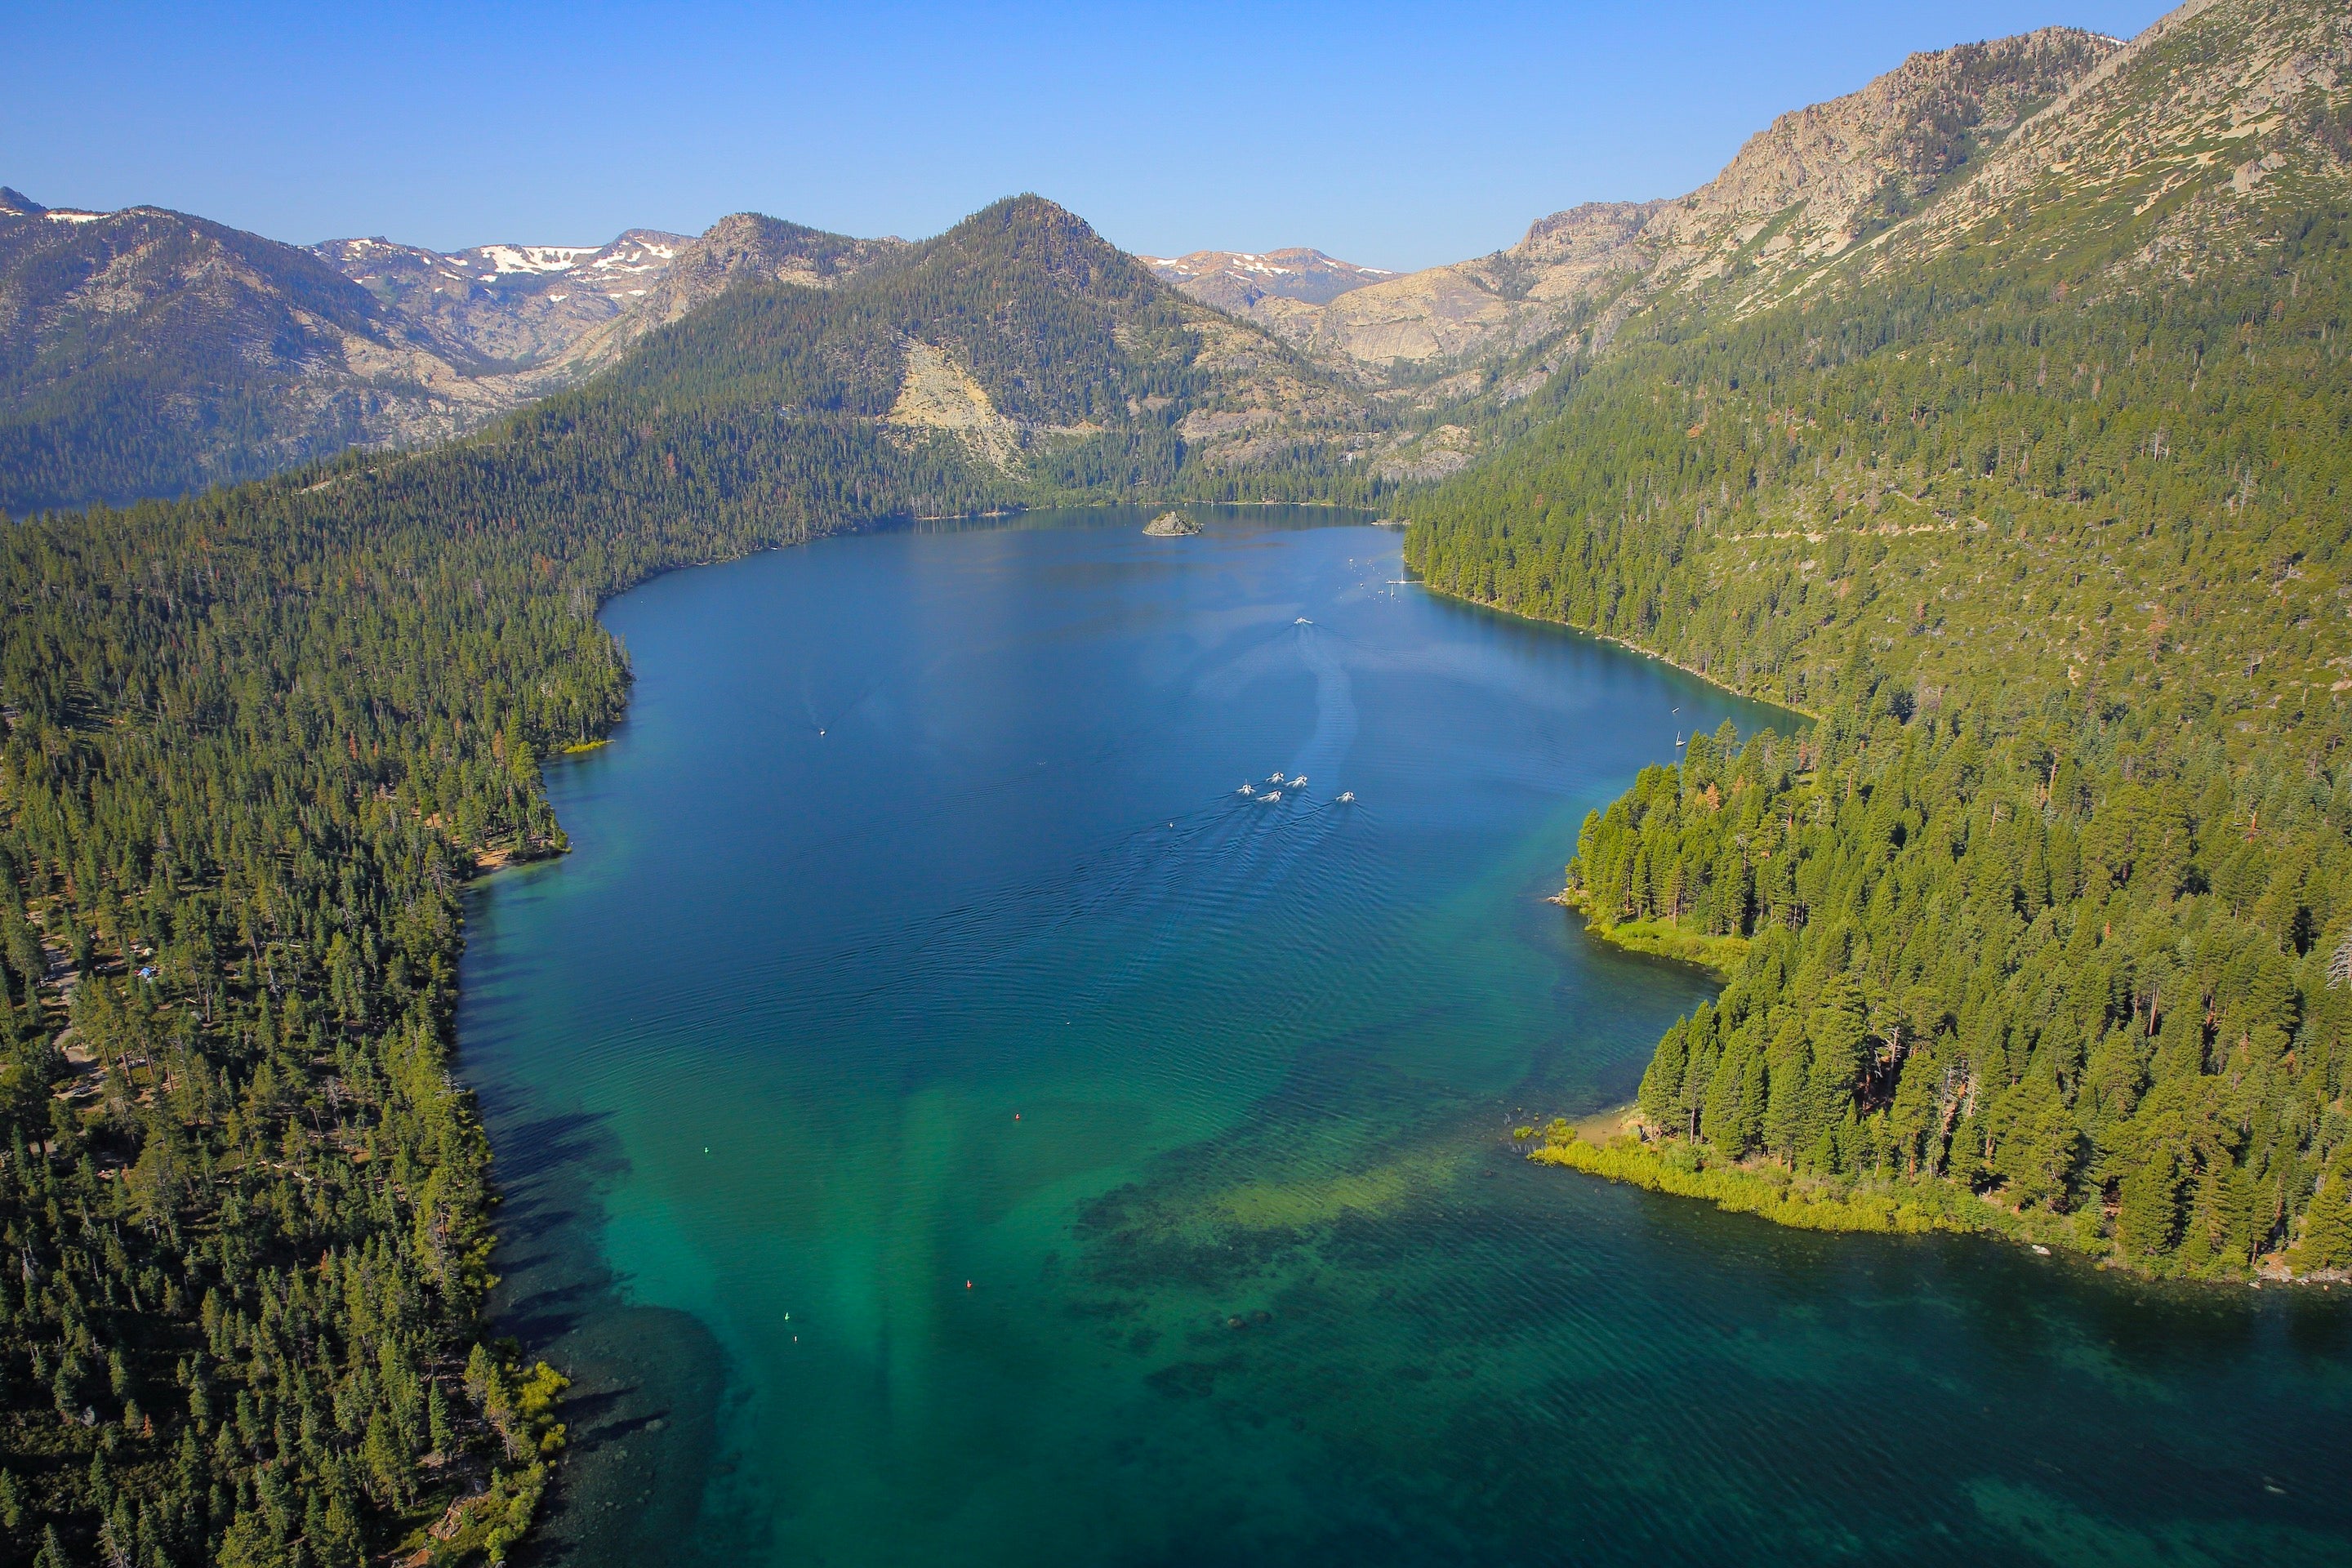 Lake Tahoe Clarity Report Mixed for 2019 - UC Davis